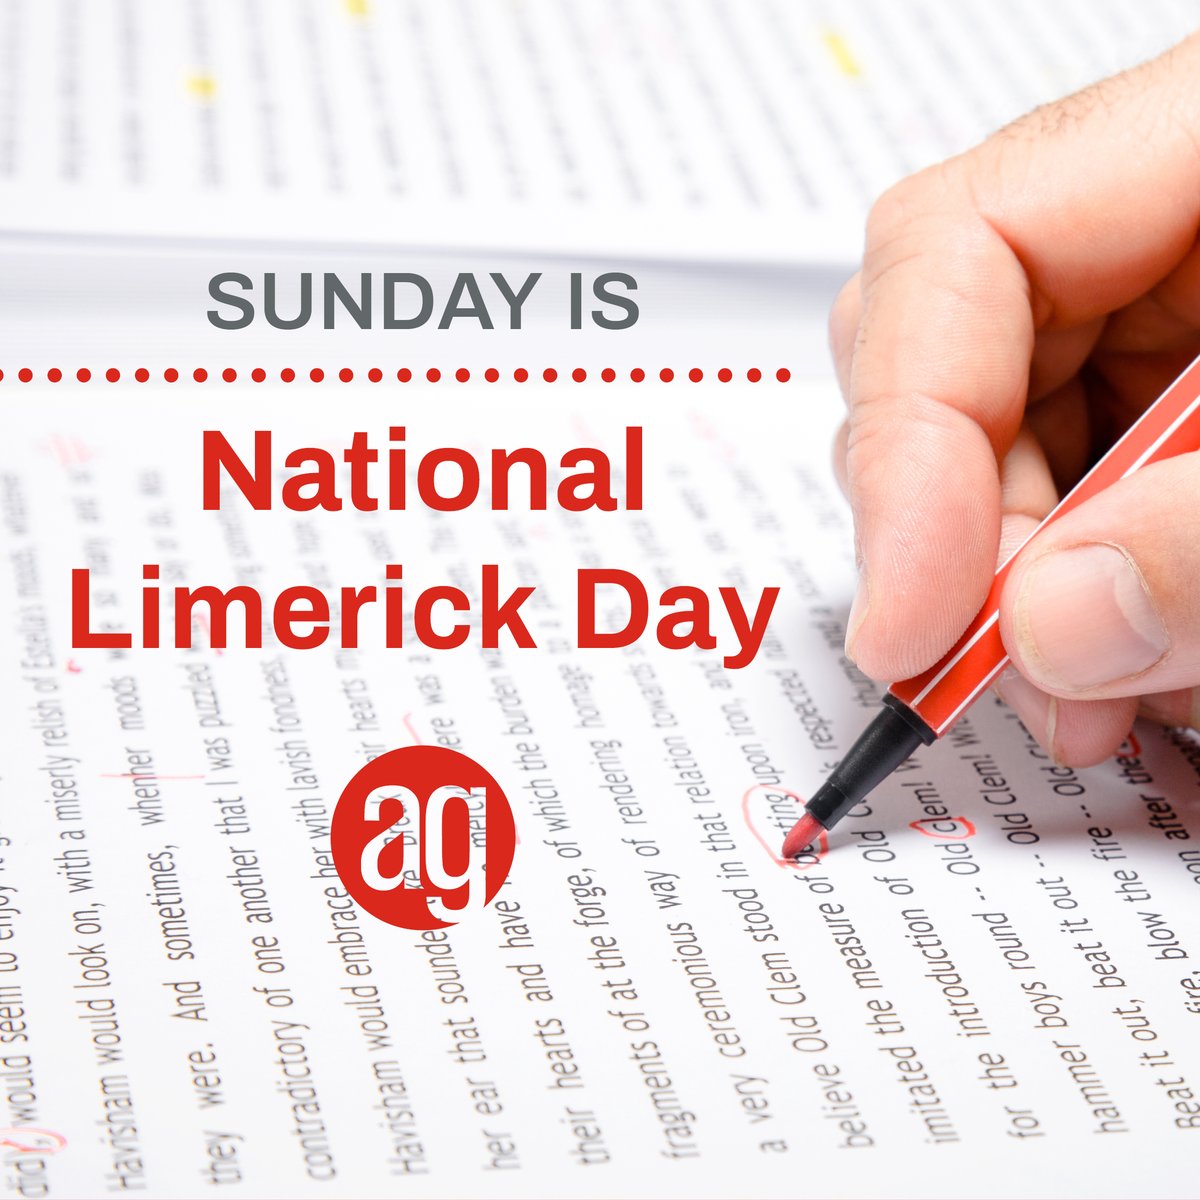 This Sunday is National Limerick Day! While you may not be writing poetry for your customers, well-appointed language has power.

Check out our copywriting services: b.link/AGcopywriting 

#NationalLimerickDay #copywriting #WoodDaleIL #FirstImpression #marketing